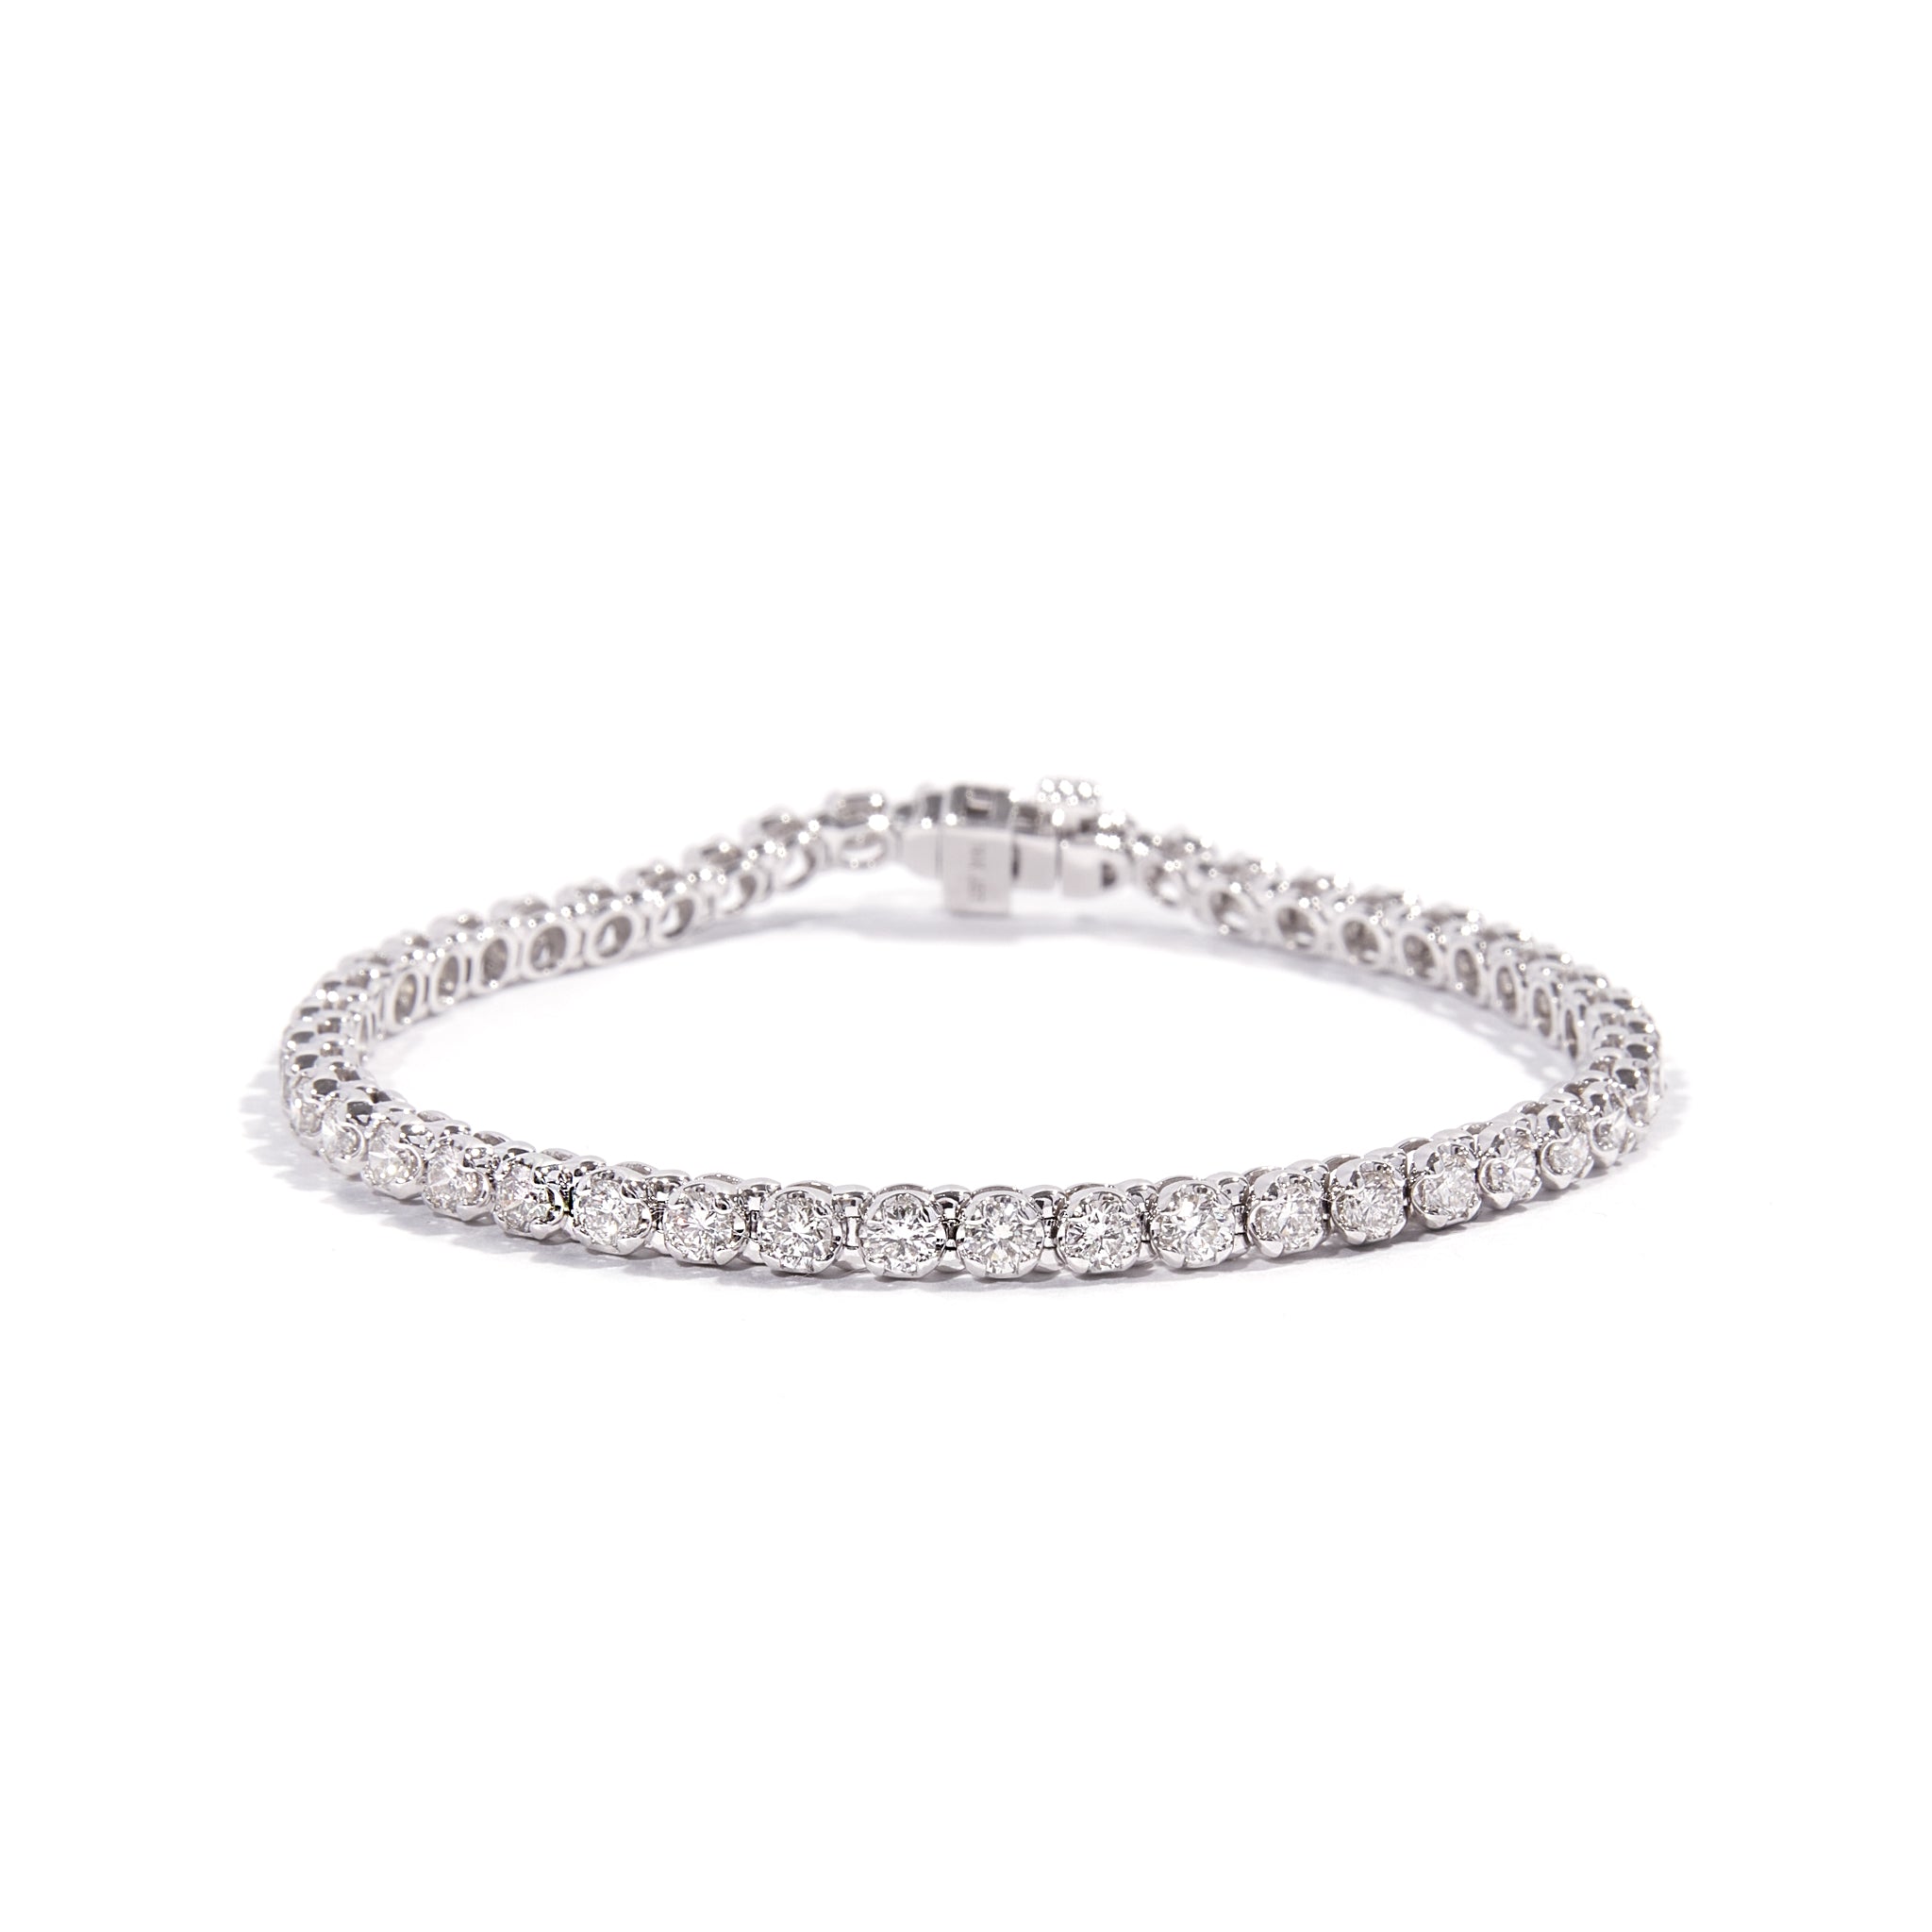 14ct White Gold Tennis Bracelet adorned with dazzling natural diamonds. Crafted in 14 carat white gold. Features a total of 4.00 carats of diamonds. Weighs 11.8 grams.